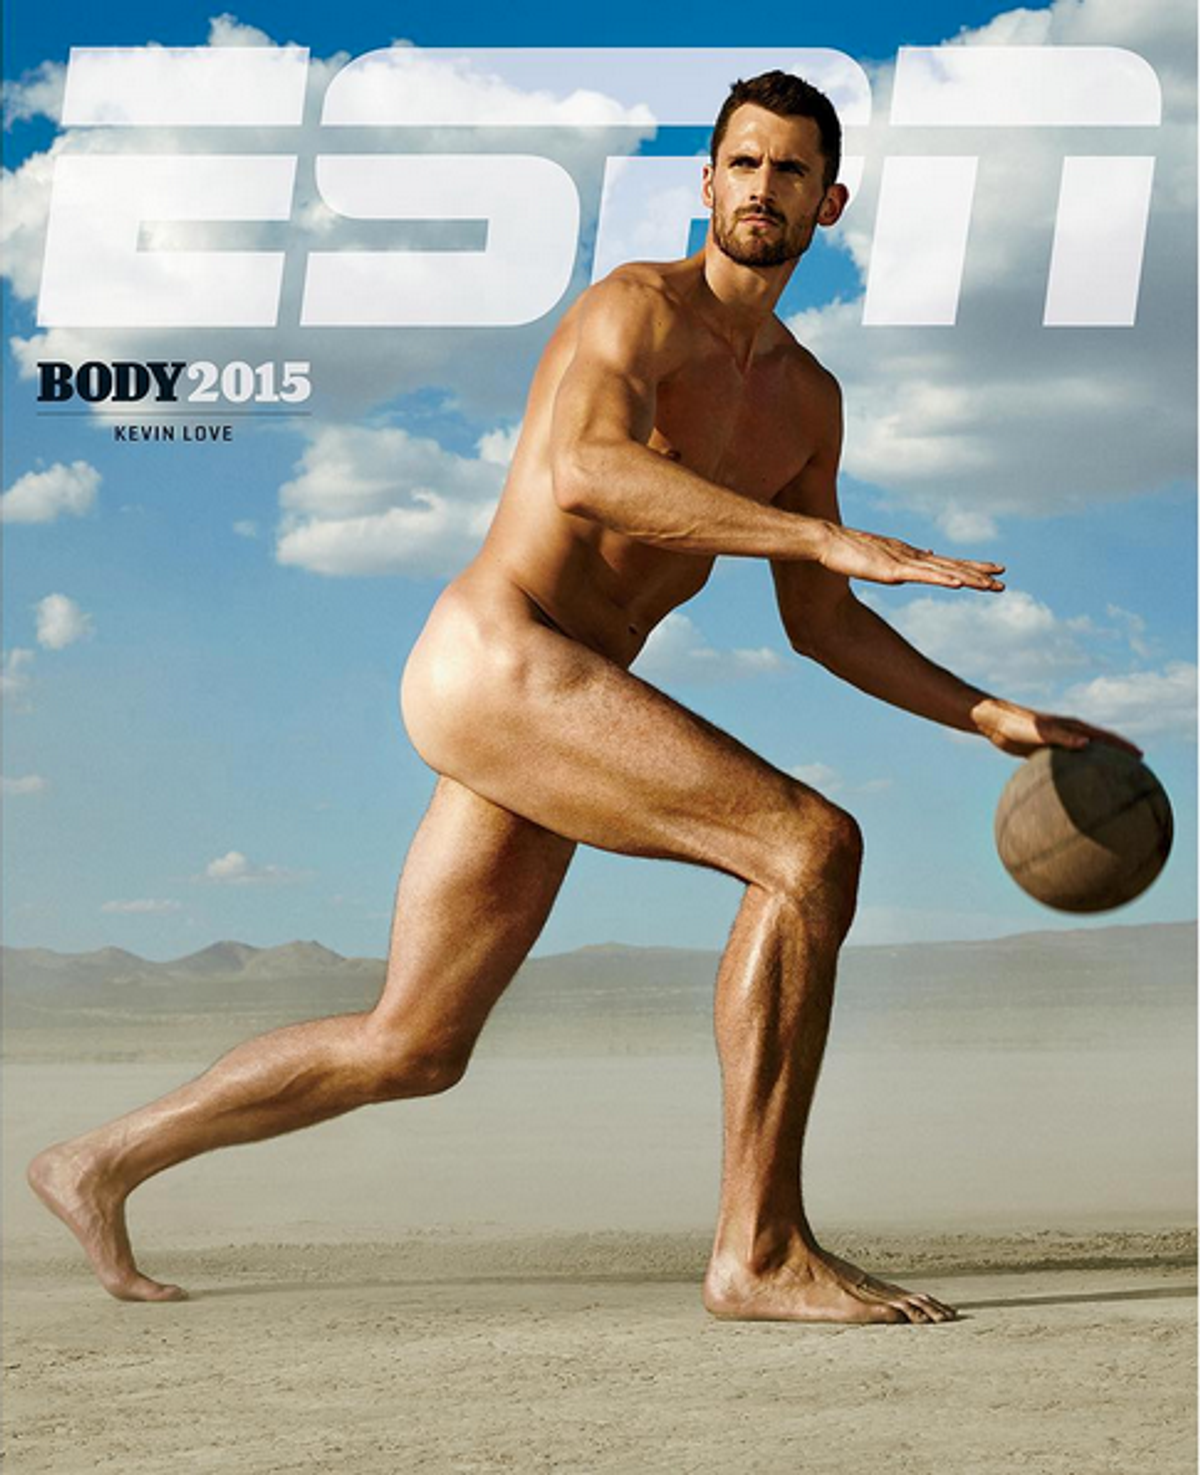 Bryce Harper, Aly Raisman Among Athletes Featured In 2015 ESPN Body Issue